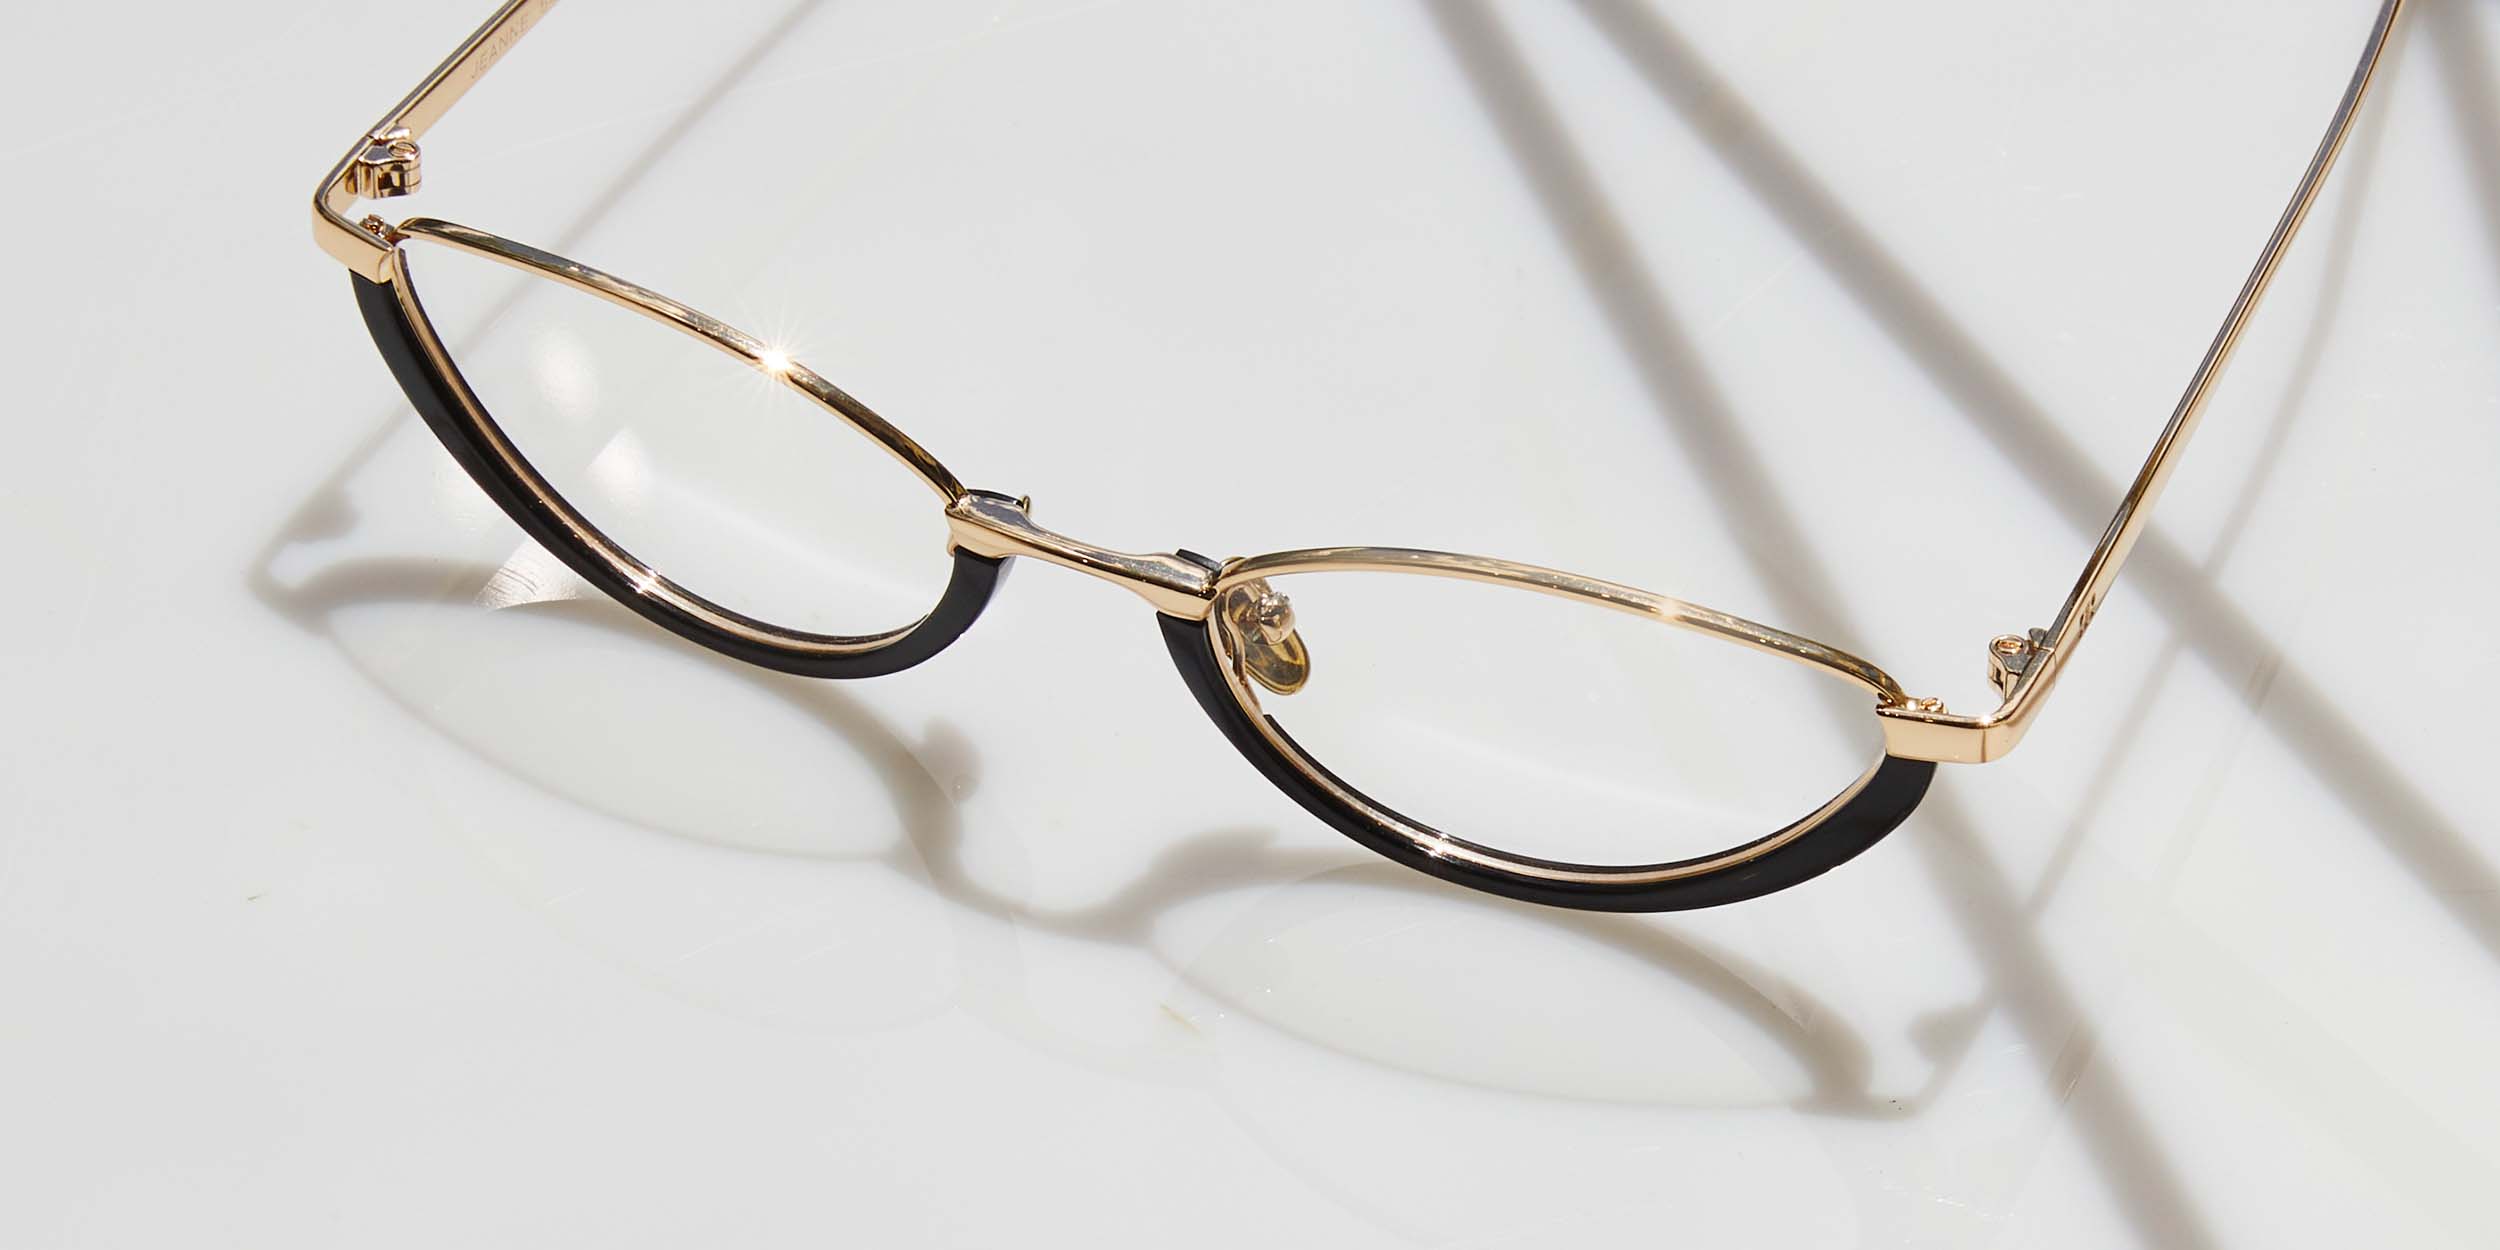 Photo Details of Jeanne Cobalt & Gold Reading Lunettes in a room